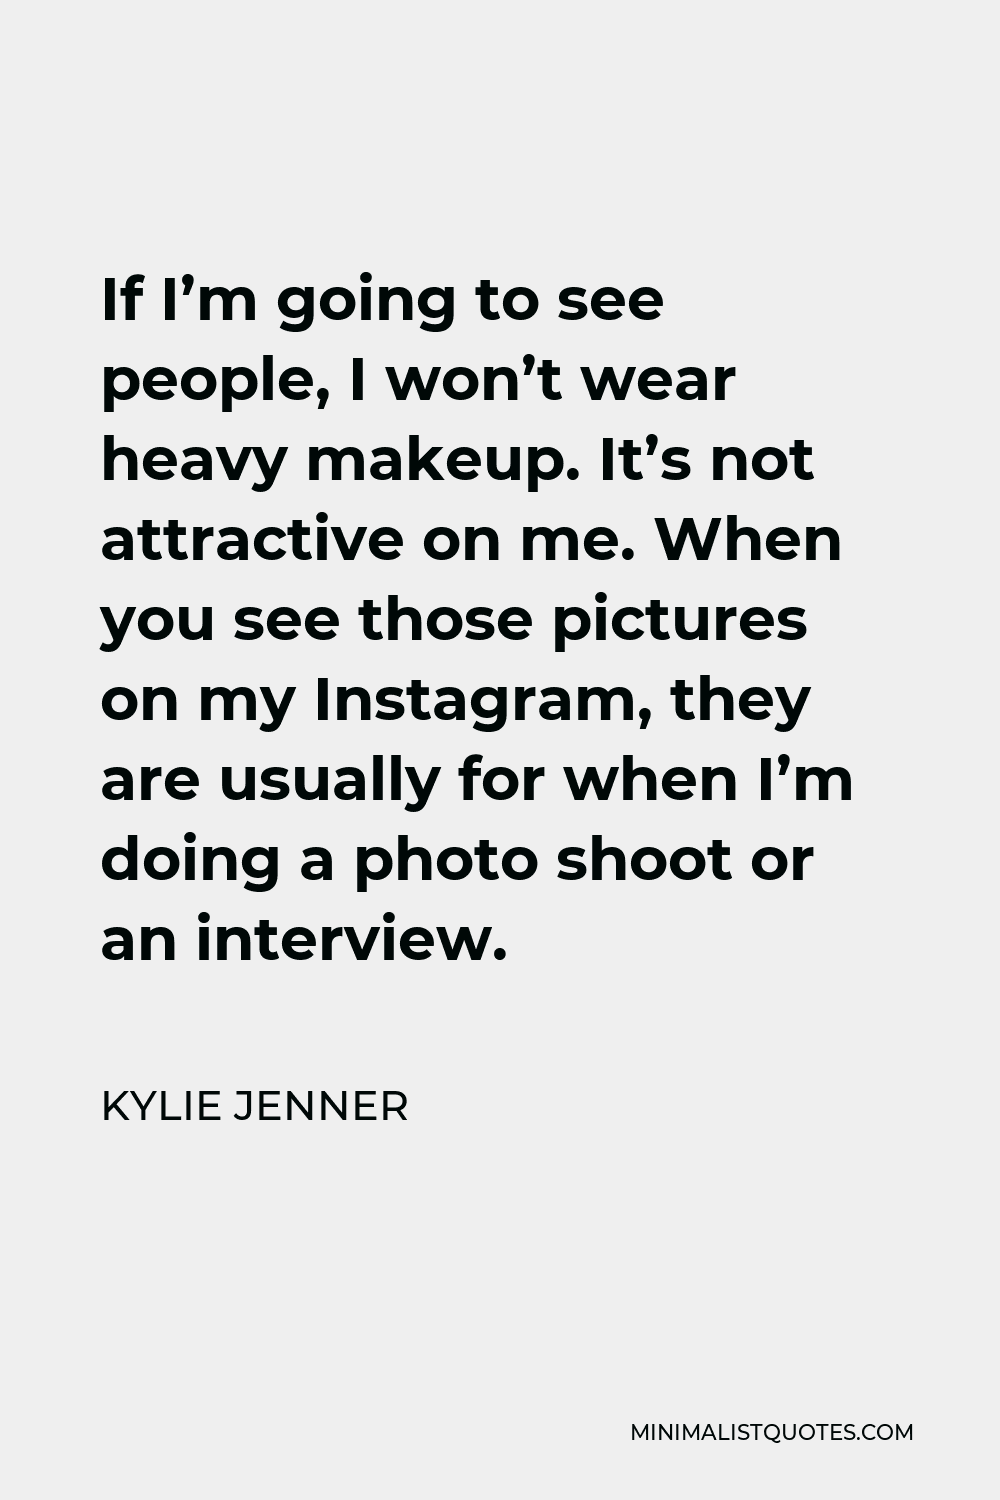 Kylie Jenner Quote - If I’m going to see people, I won’t wear heavy makeup. It’s not attractive on me. When you see those pictures on my Instagram, they are usually for when I’m doing a photo shoot or an interview.